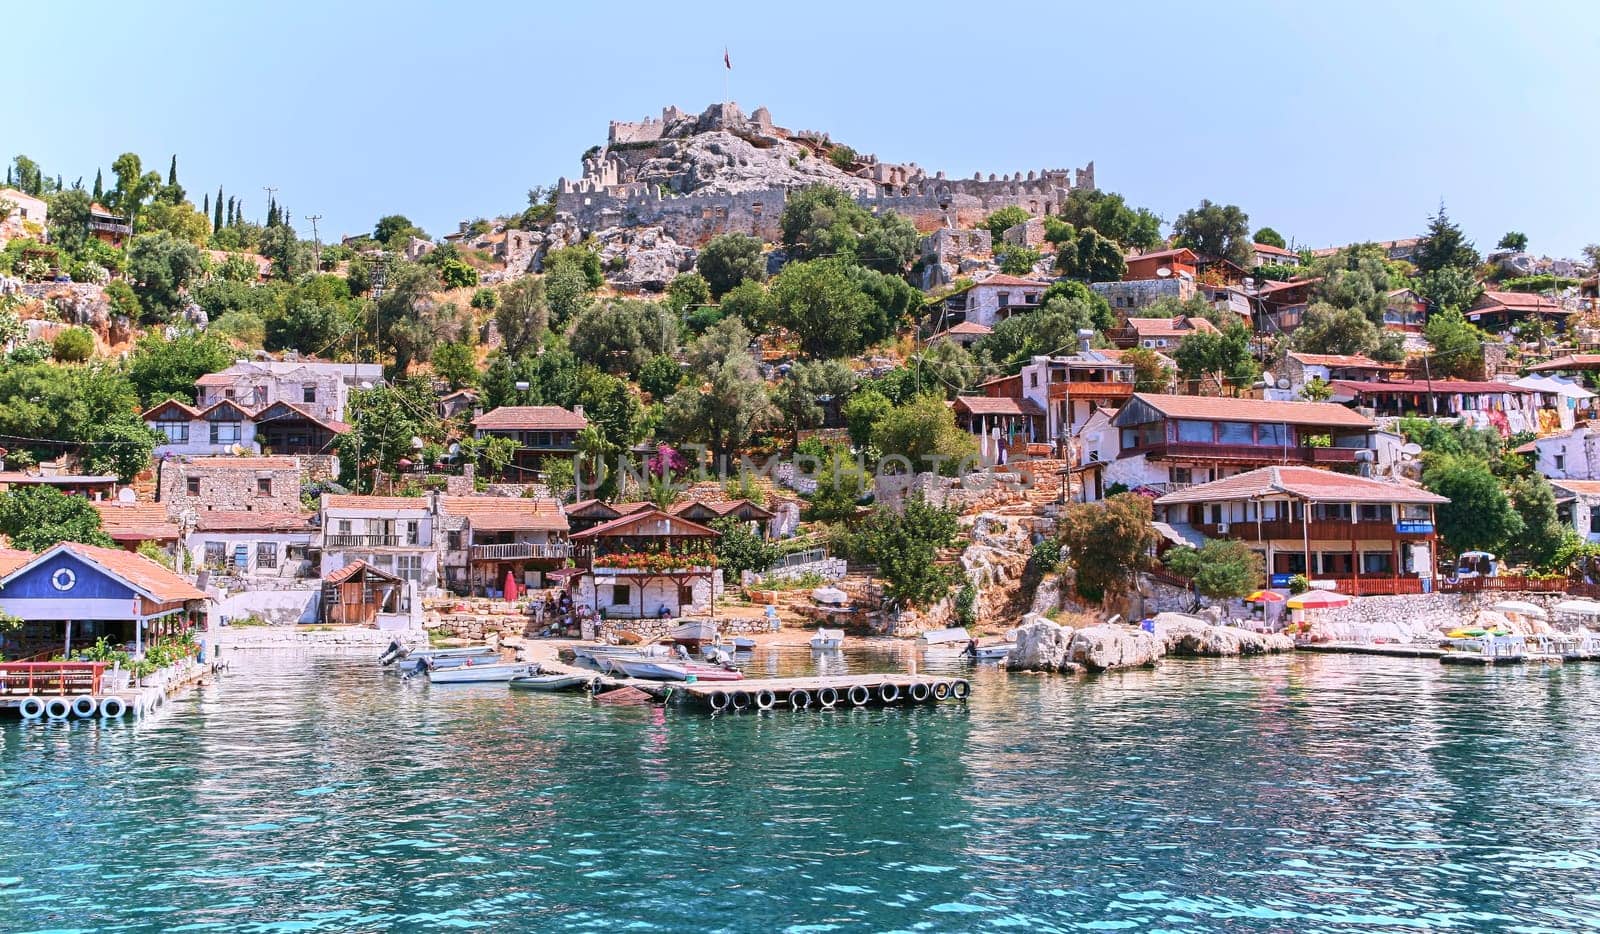 Experience the charm of traditional Turkish architecture as you cruise along serene waters, admiring quaint houses against a picturesque landscape, capturing the essence of this historic heritage.